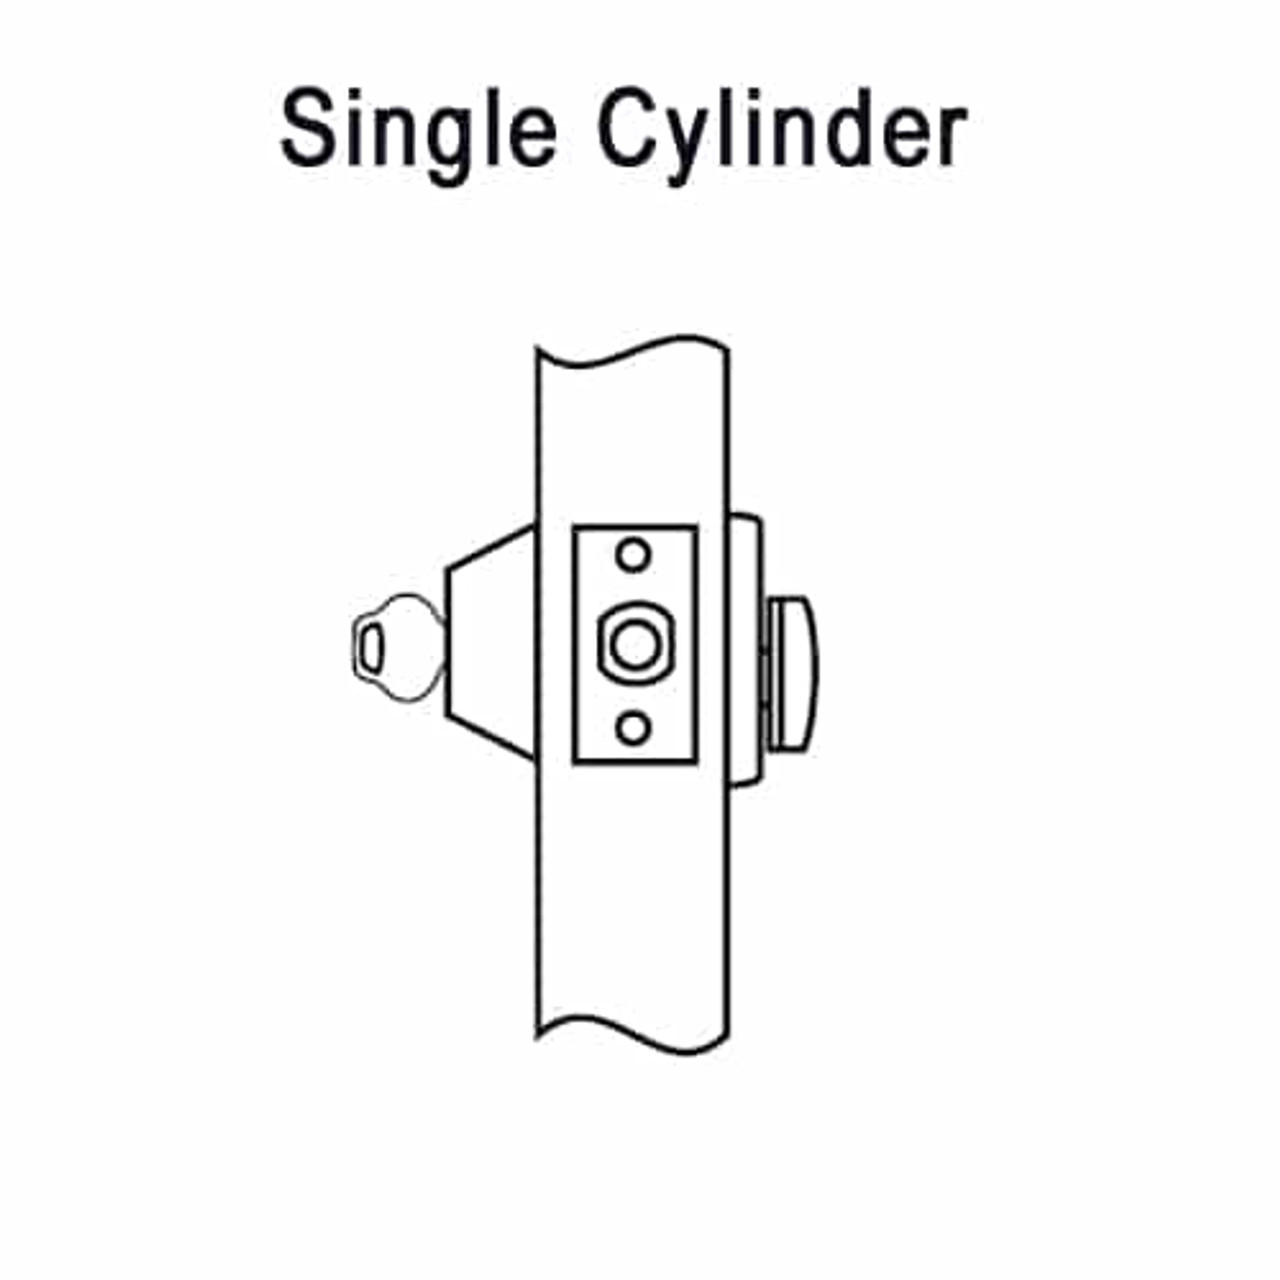 DL3213-625 Corbin DL3200 Series Cylindrical Deadlocks with Single Cylinder in Bright Chrome